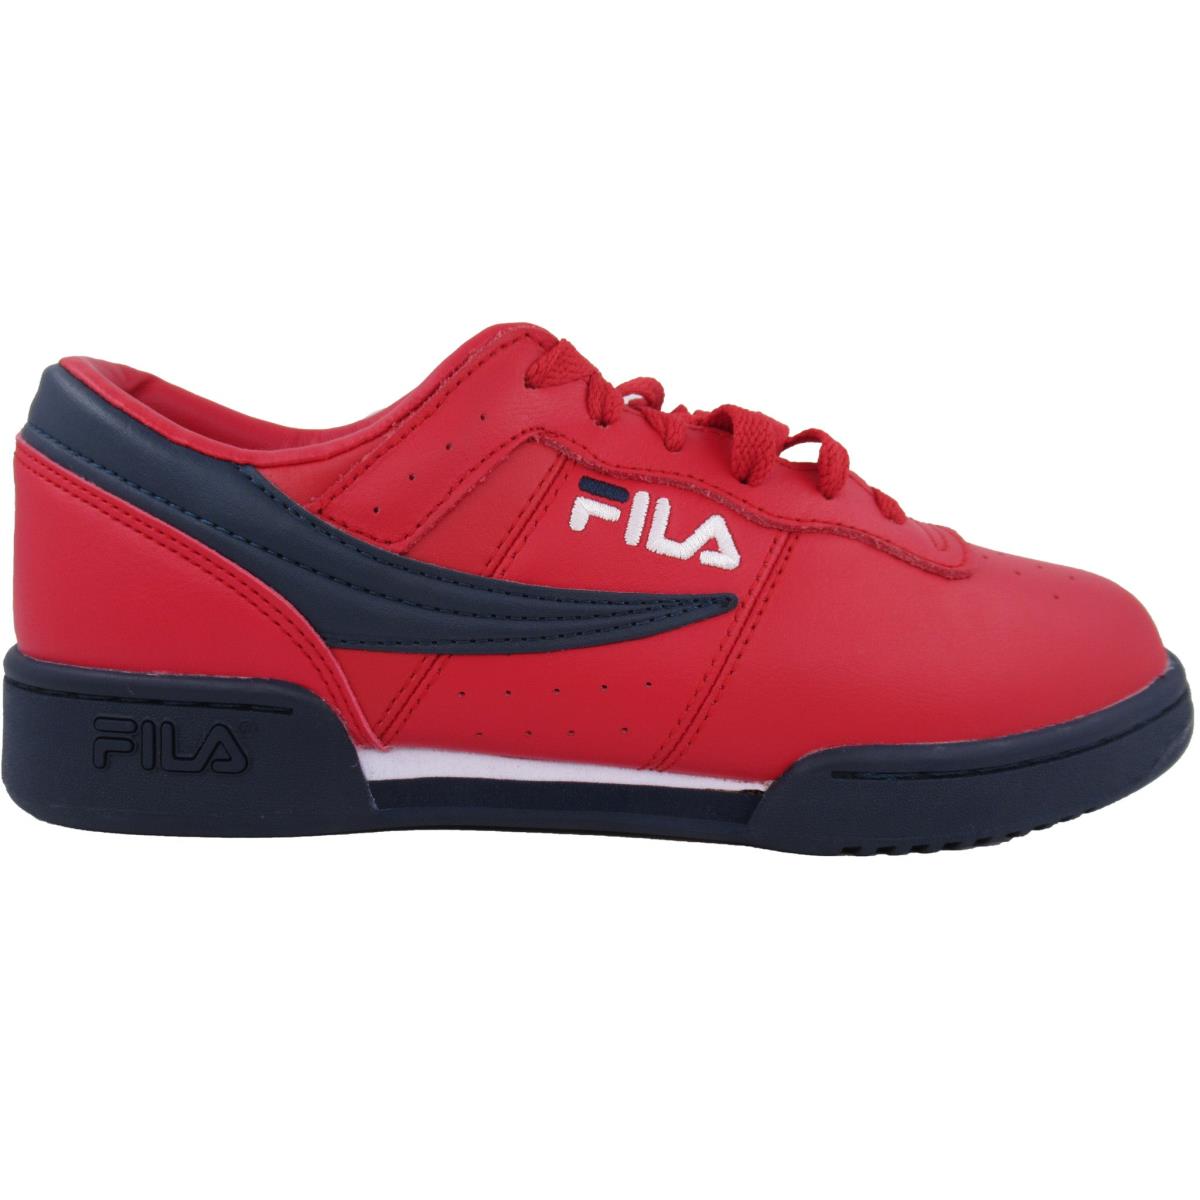 Fila Men`s Fitness Classic Fashion Retro Casual Athletic Sneakers Shoes